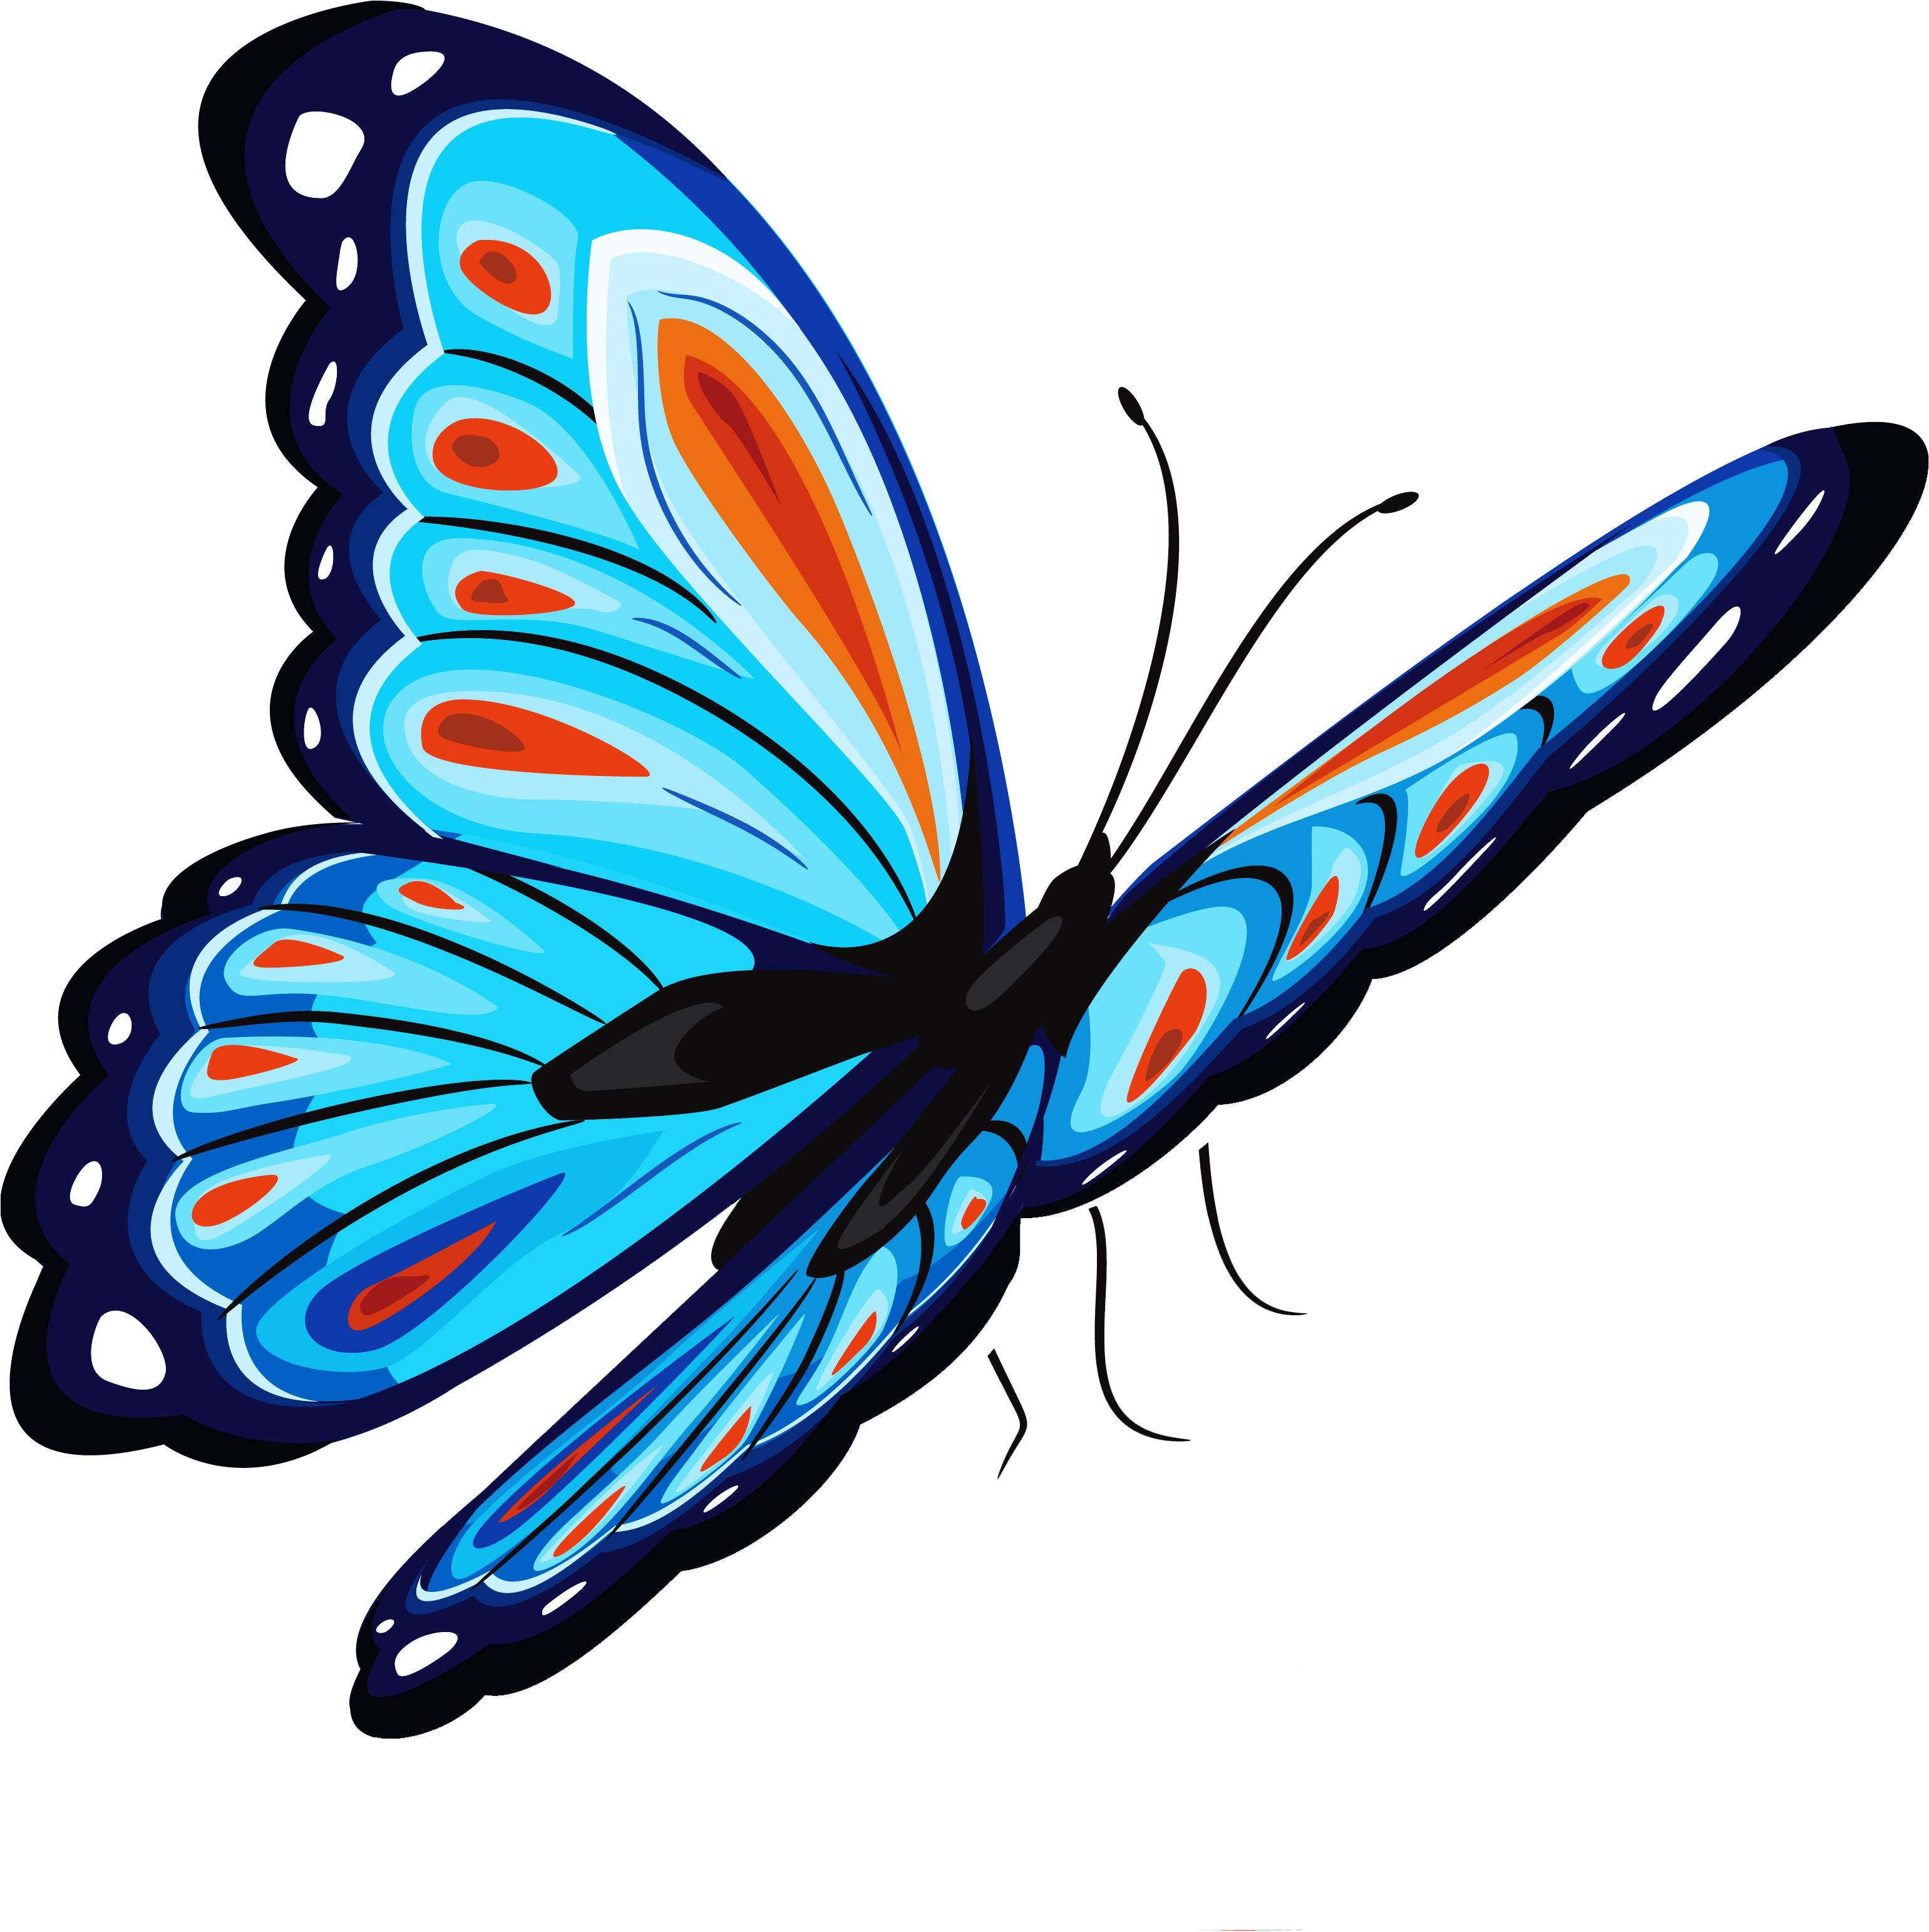 A Blue Butterfly With Orange And White Spots